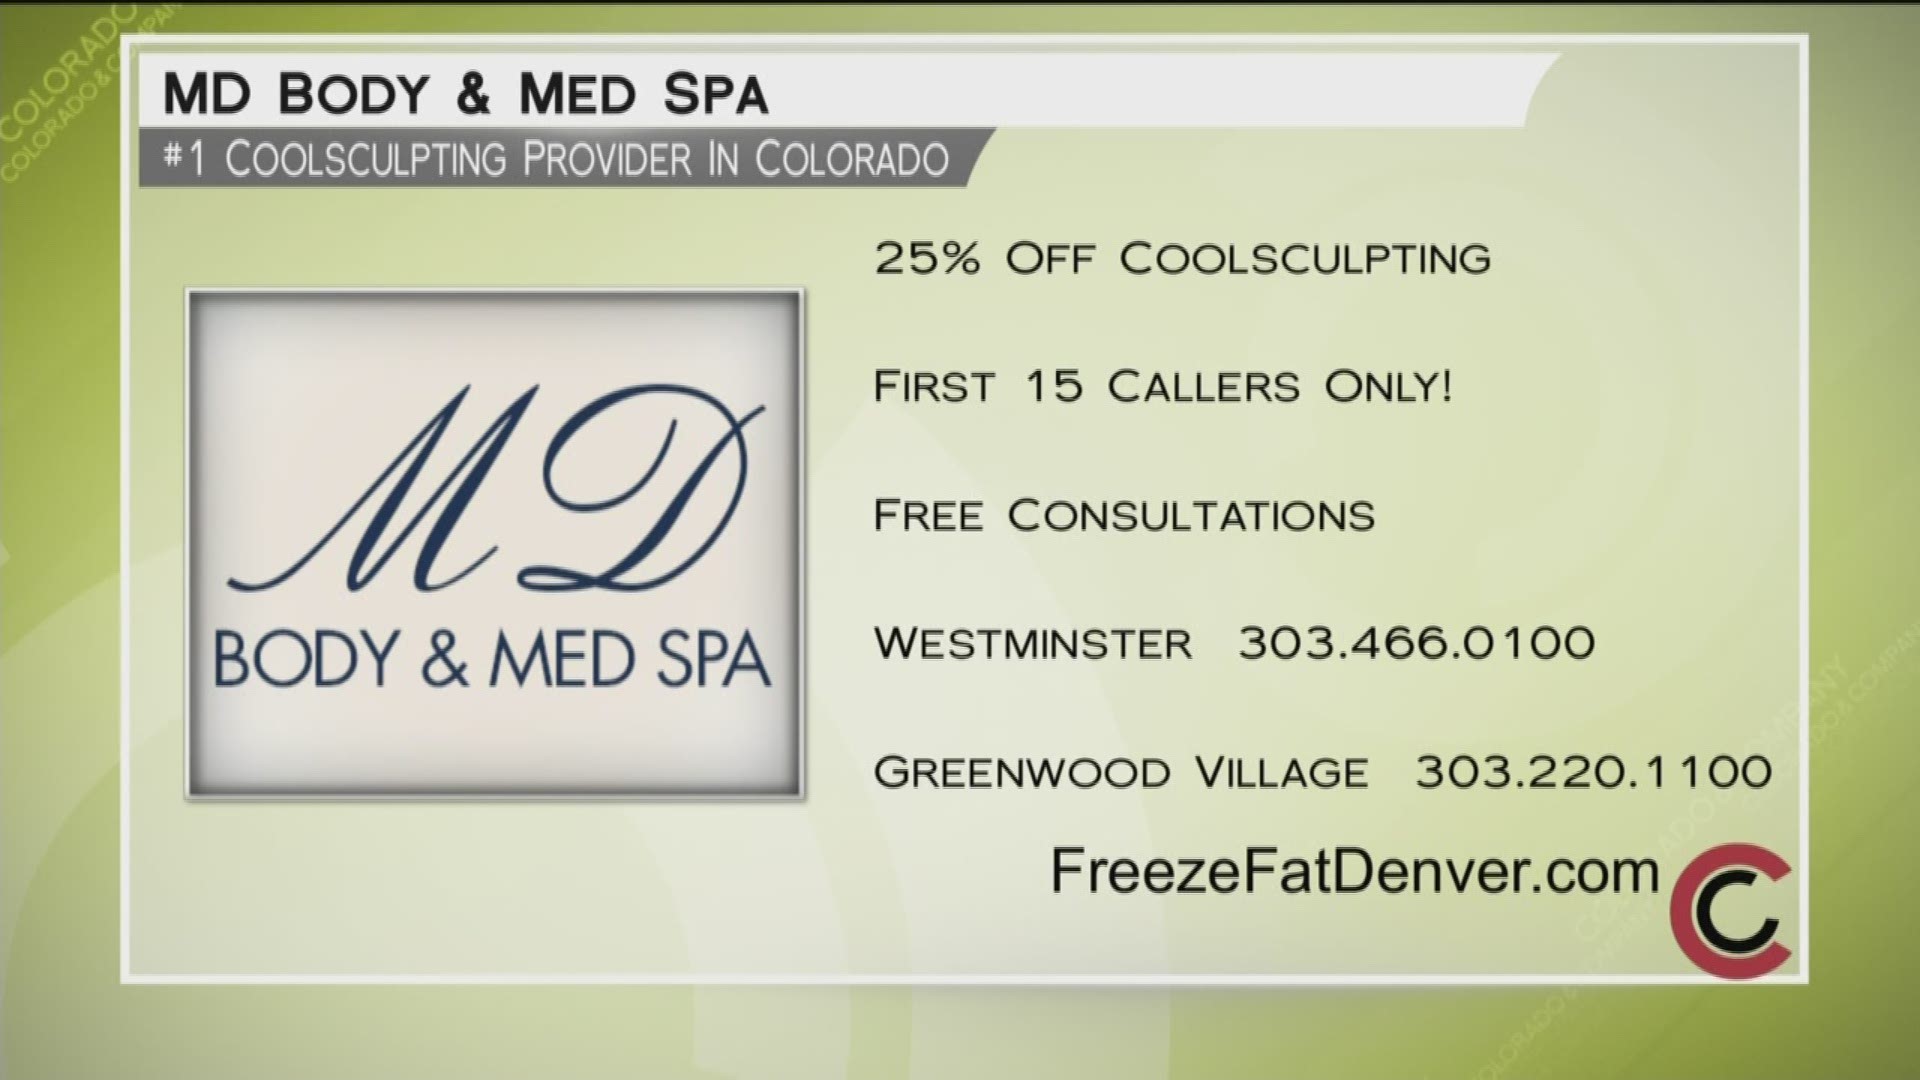 Call 303-466-0100 or 303-220-1100 now and receive 25% off any Coolsculpting package and a "free" consultation. Get more at FreezeFatDenver.com.